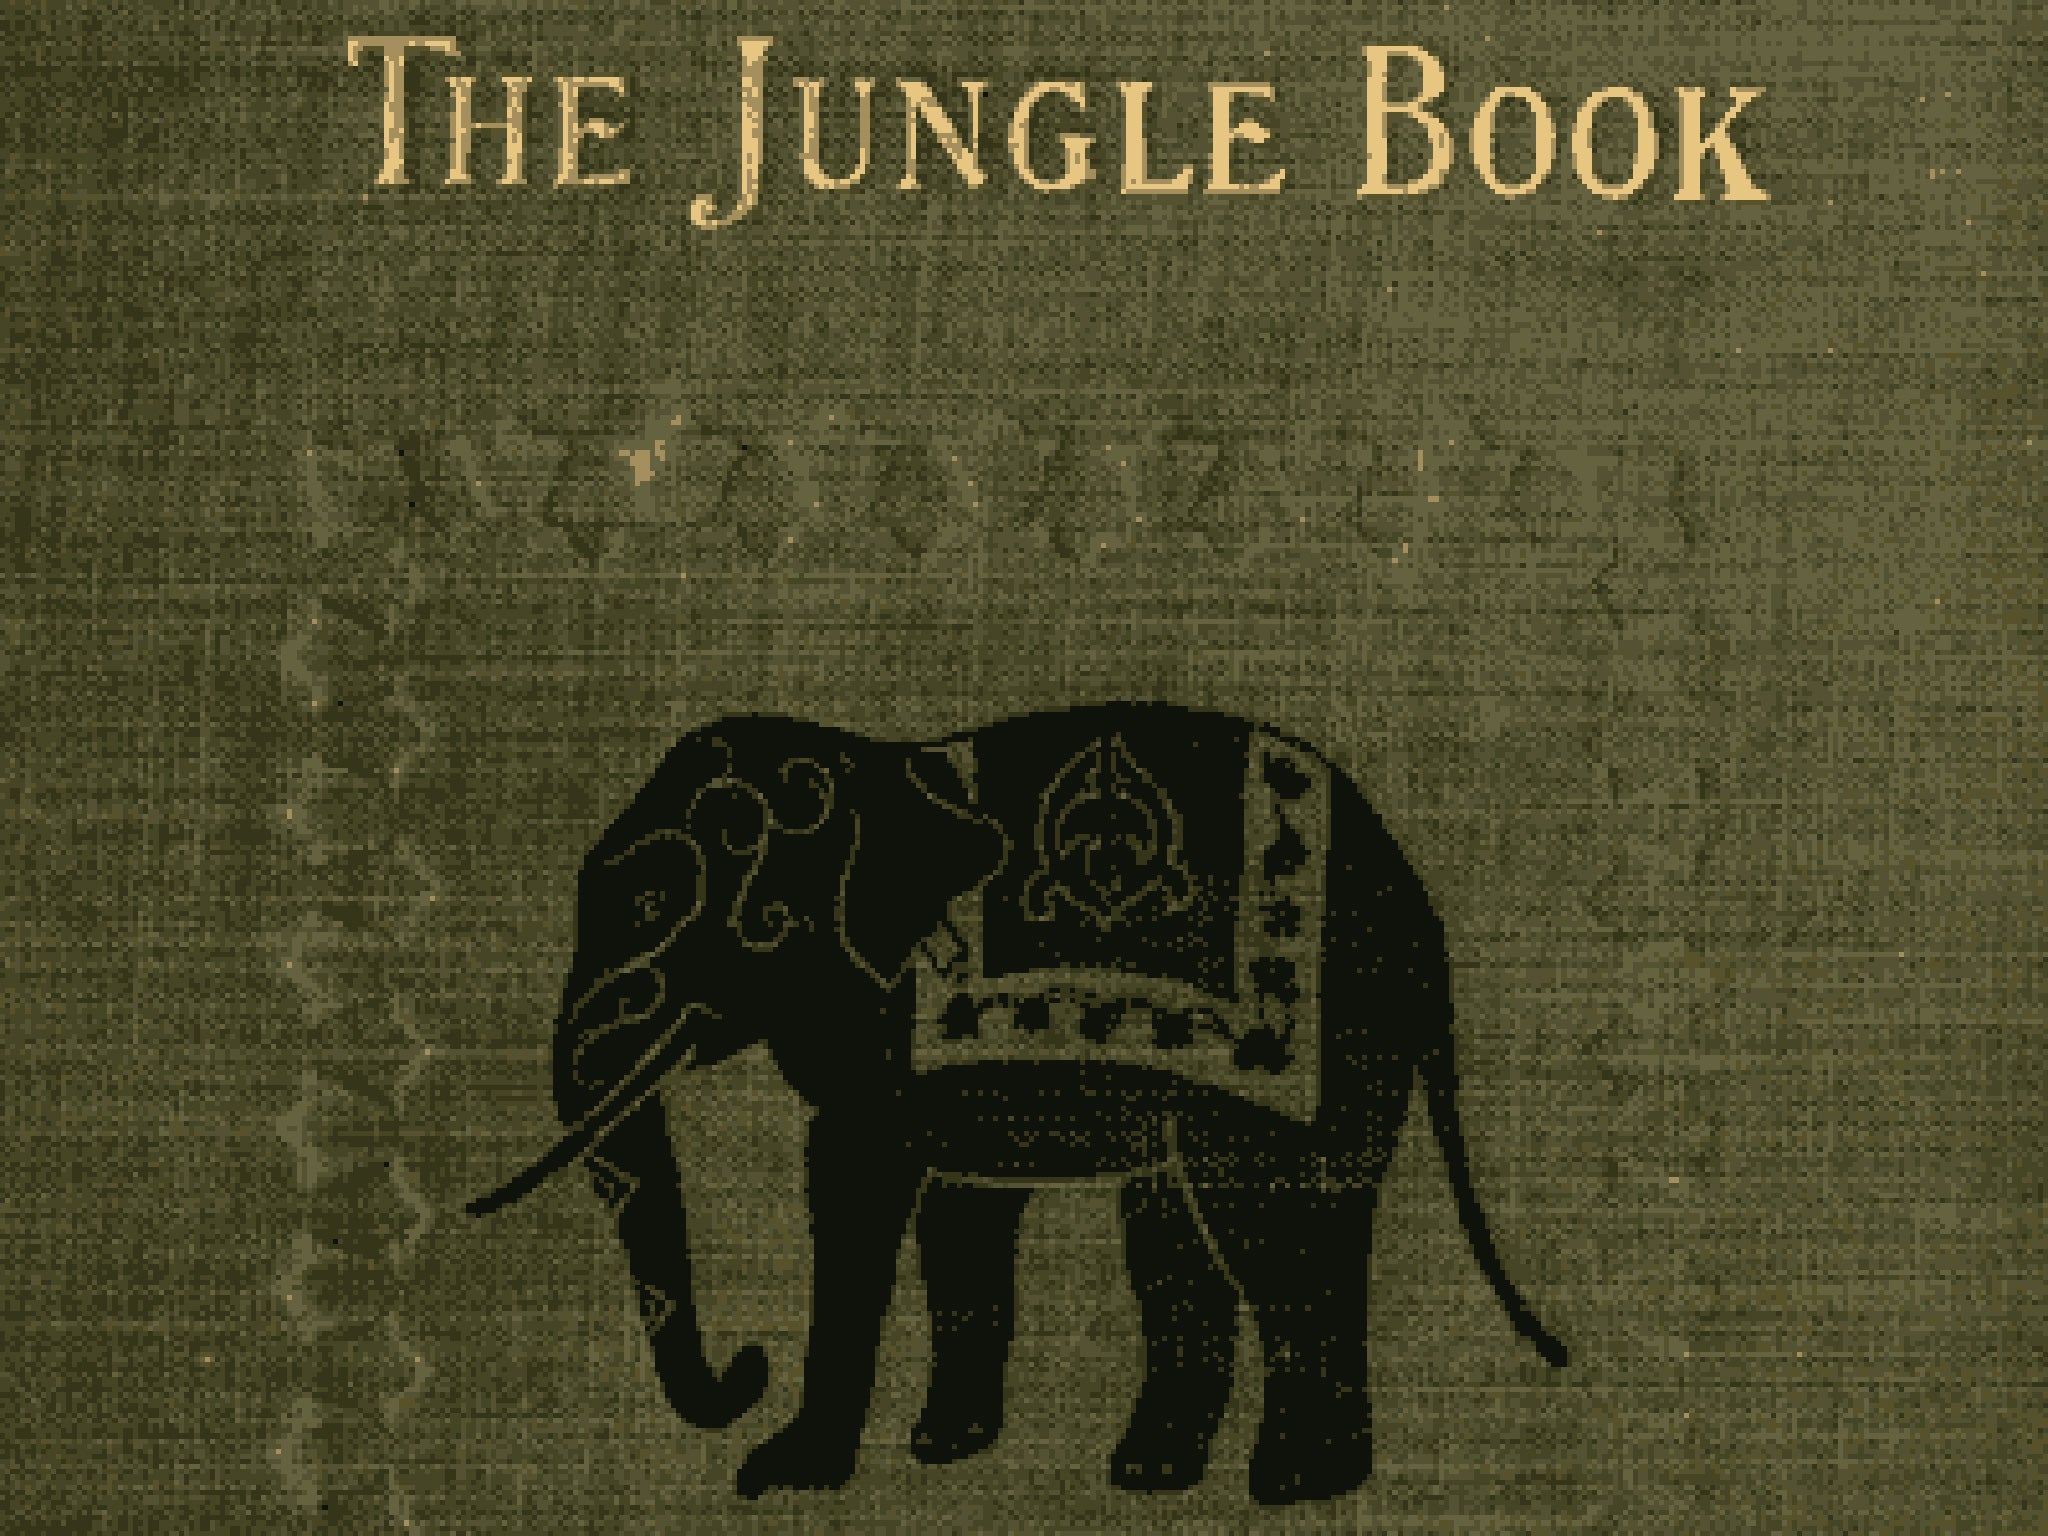 The Jungle Book was originally published in 1894, followed by The Second Jungle book a year later